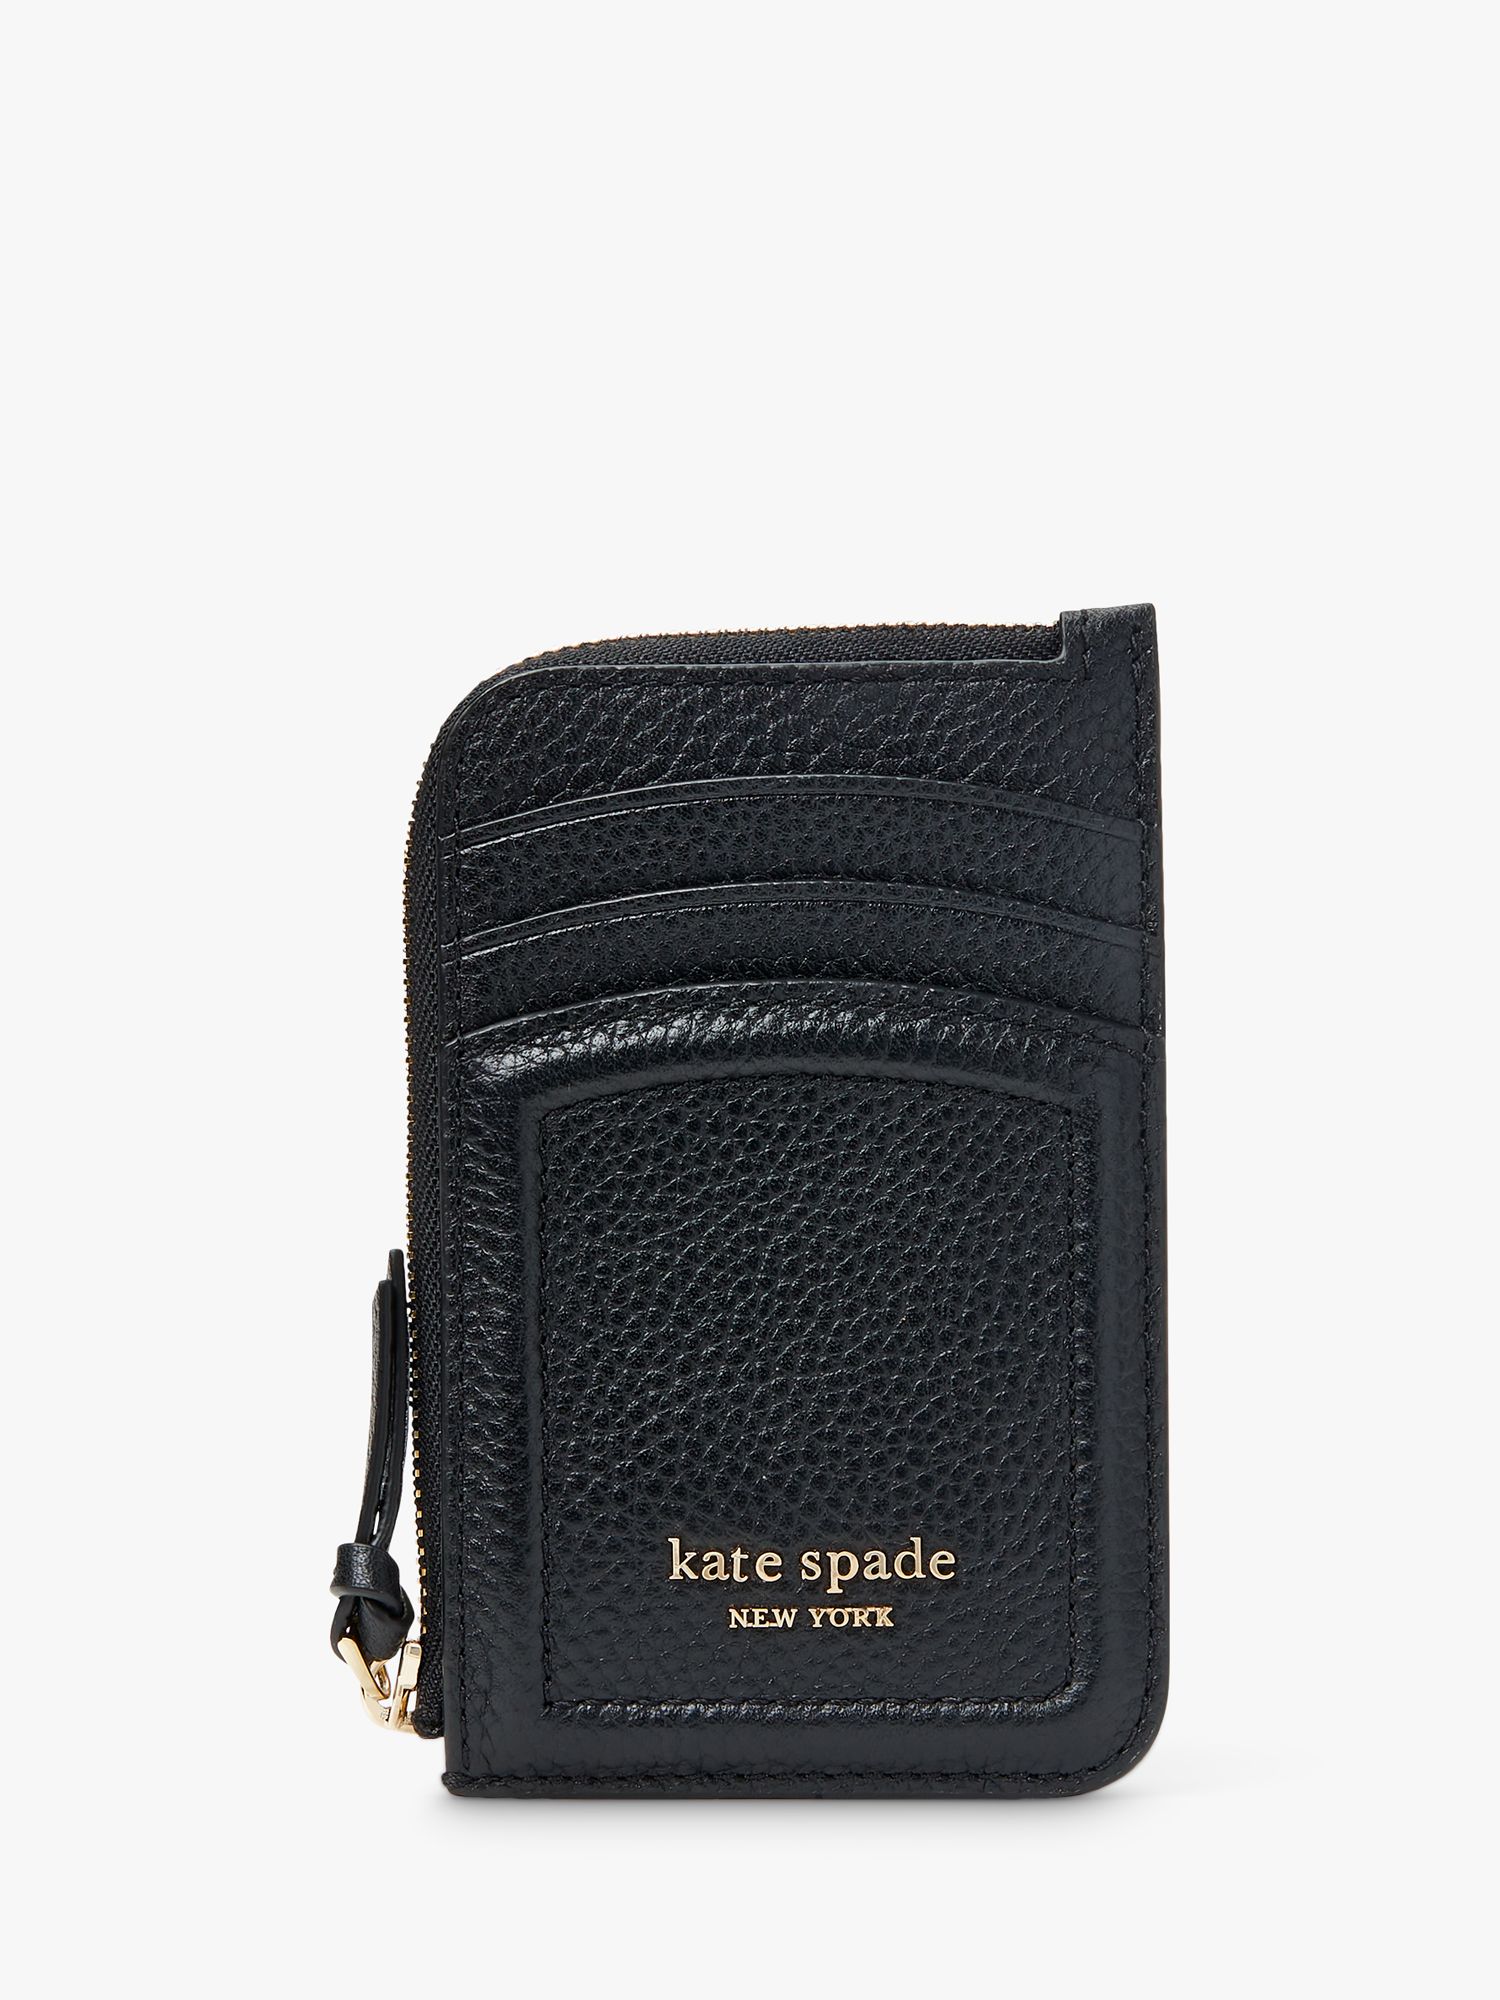 kate spade new york Knott Leather Coin Card Holder